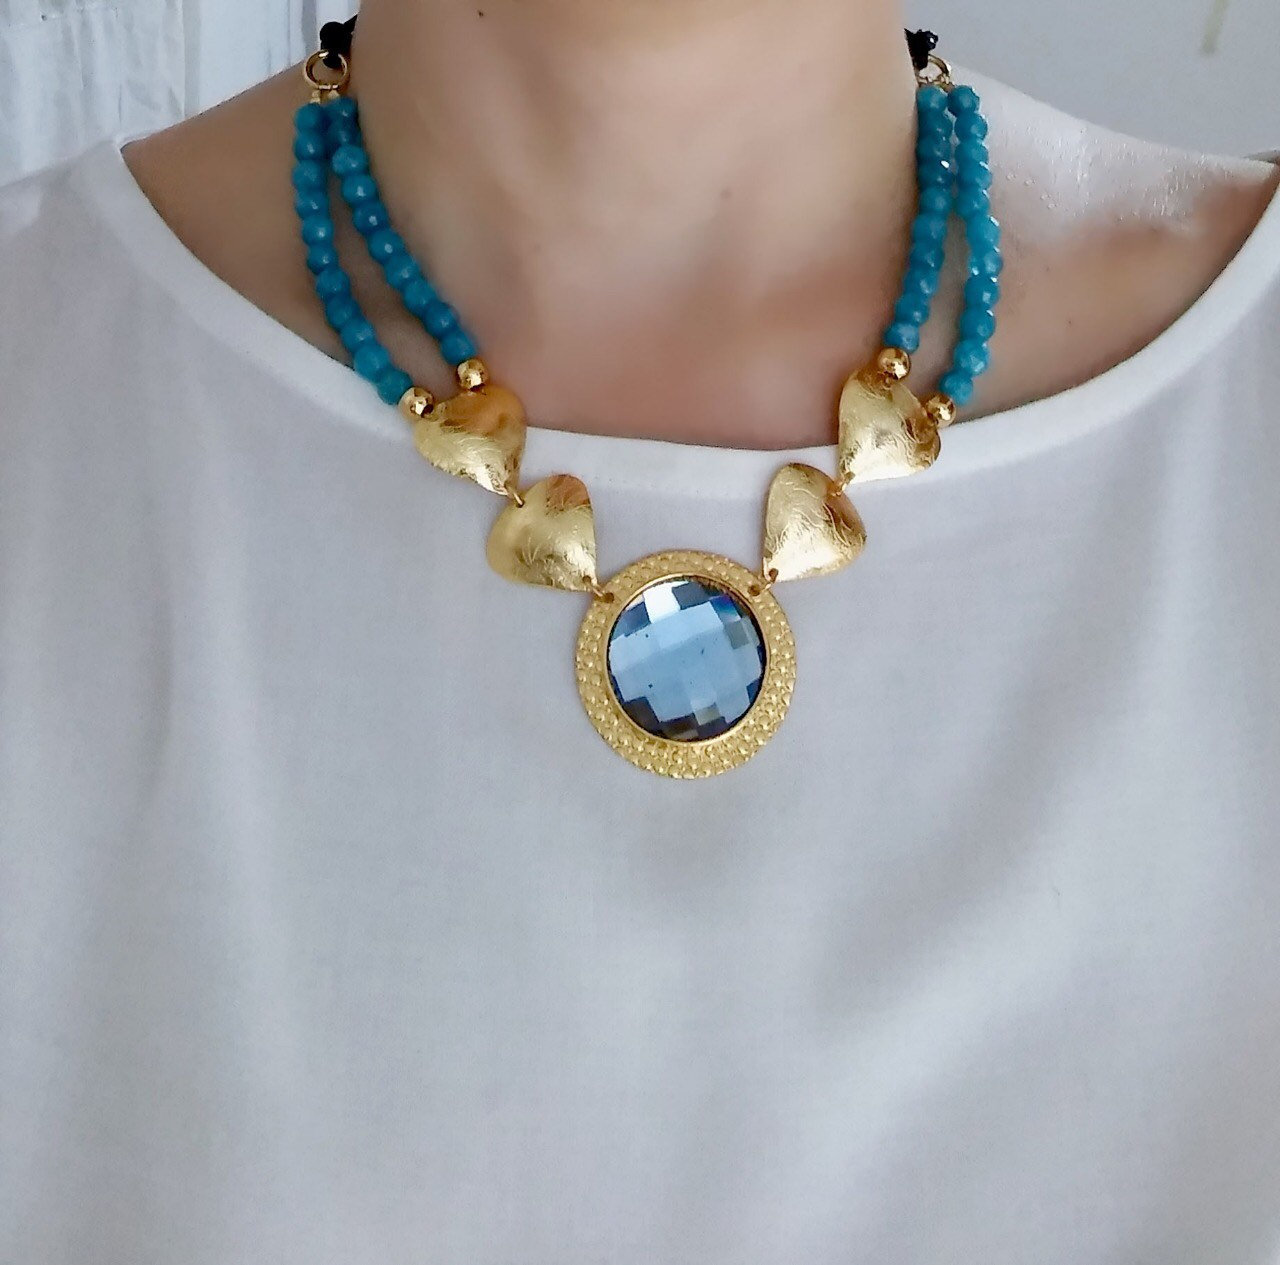 Blue Agate and crystals necklace set in bronze double gold plated in 24 k gold